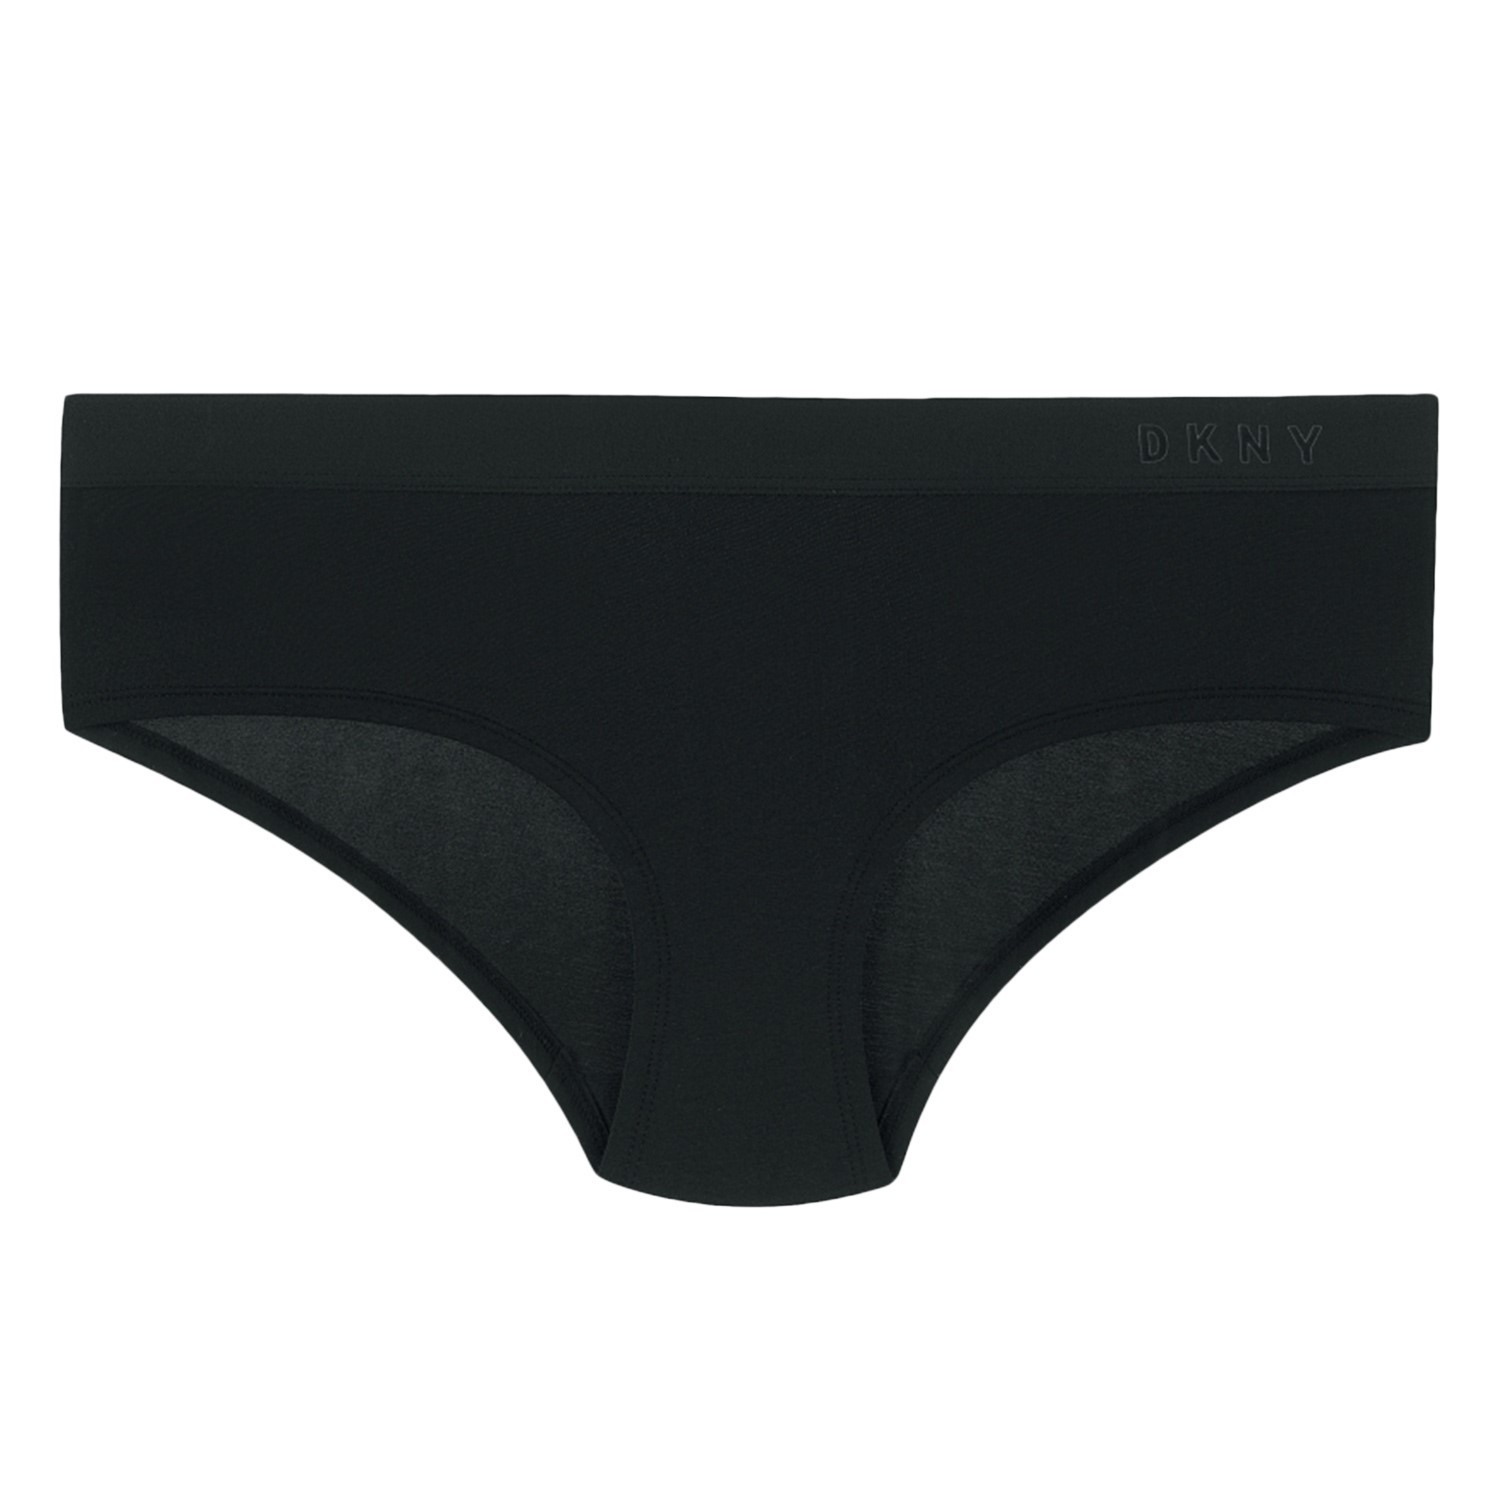 DKNY Classic Cotton Tailored Boy Brief 